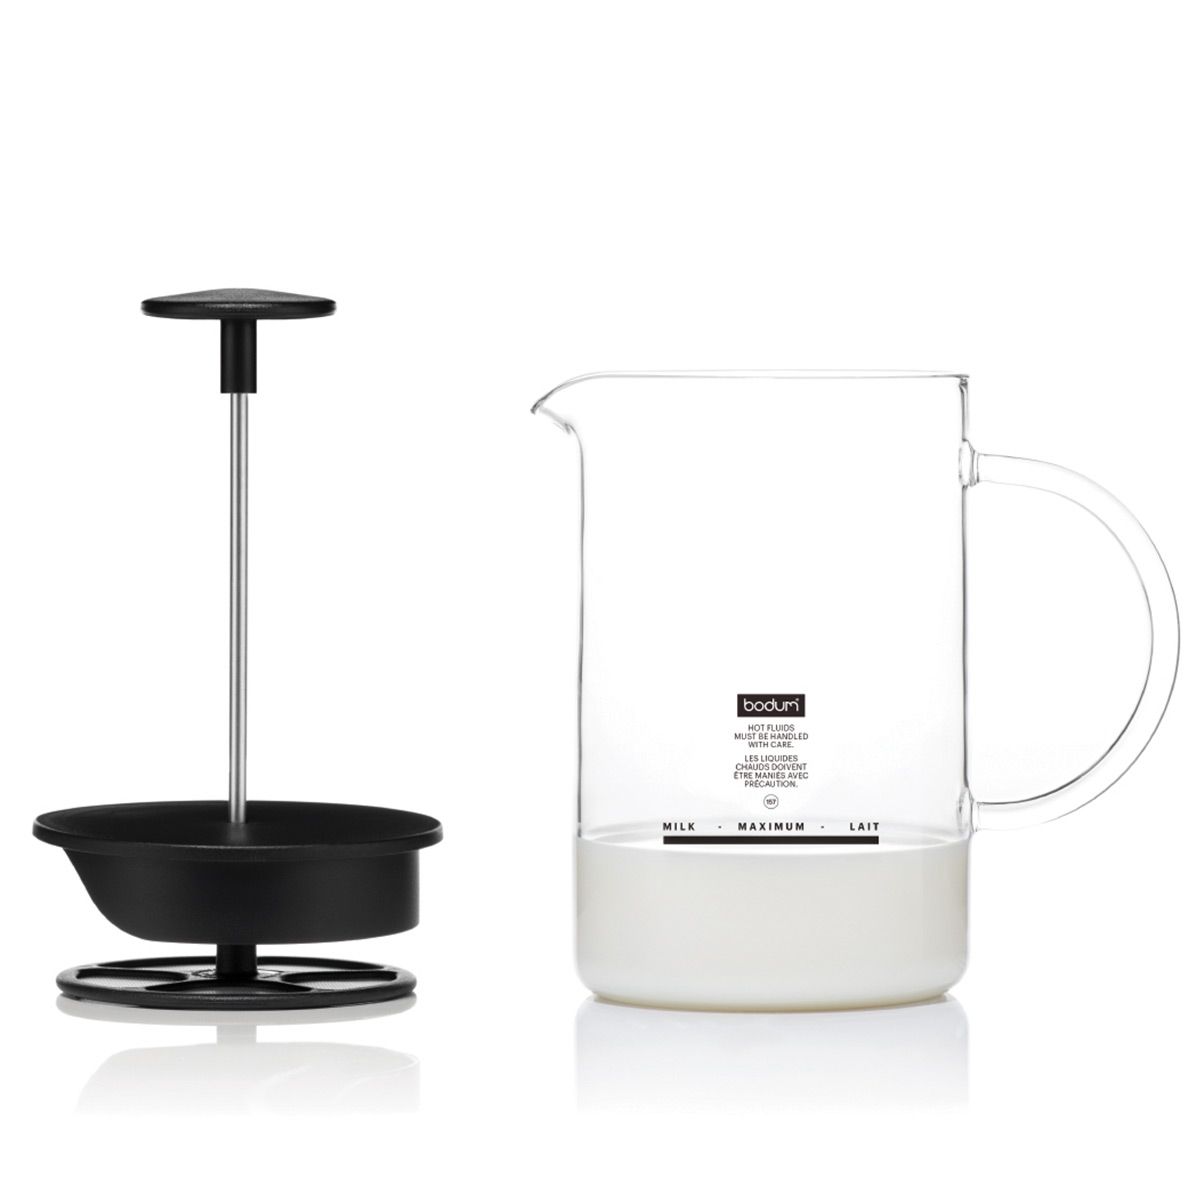 Bodum Latteo Milk frother with glass handle, 0.25 l, 8 oz